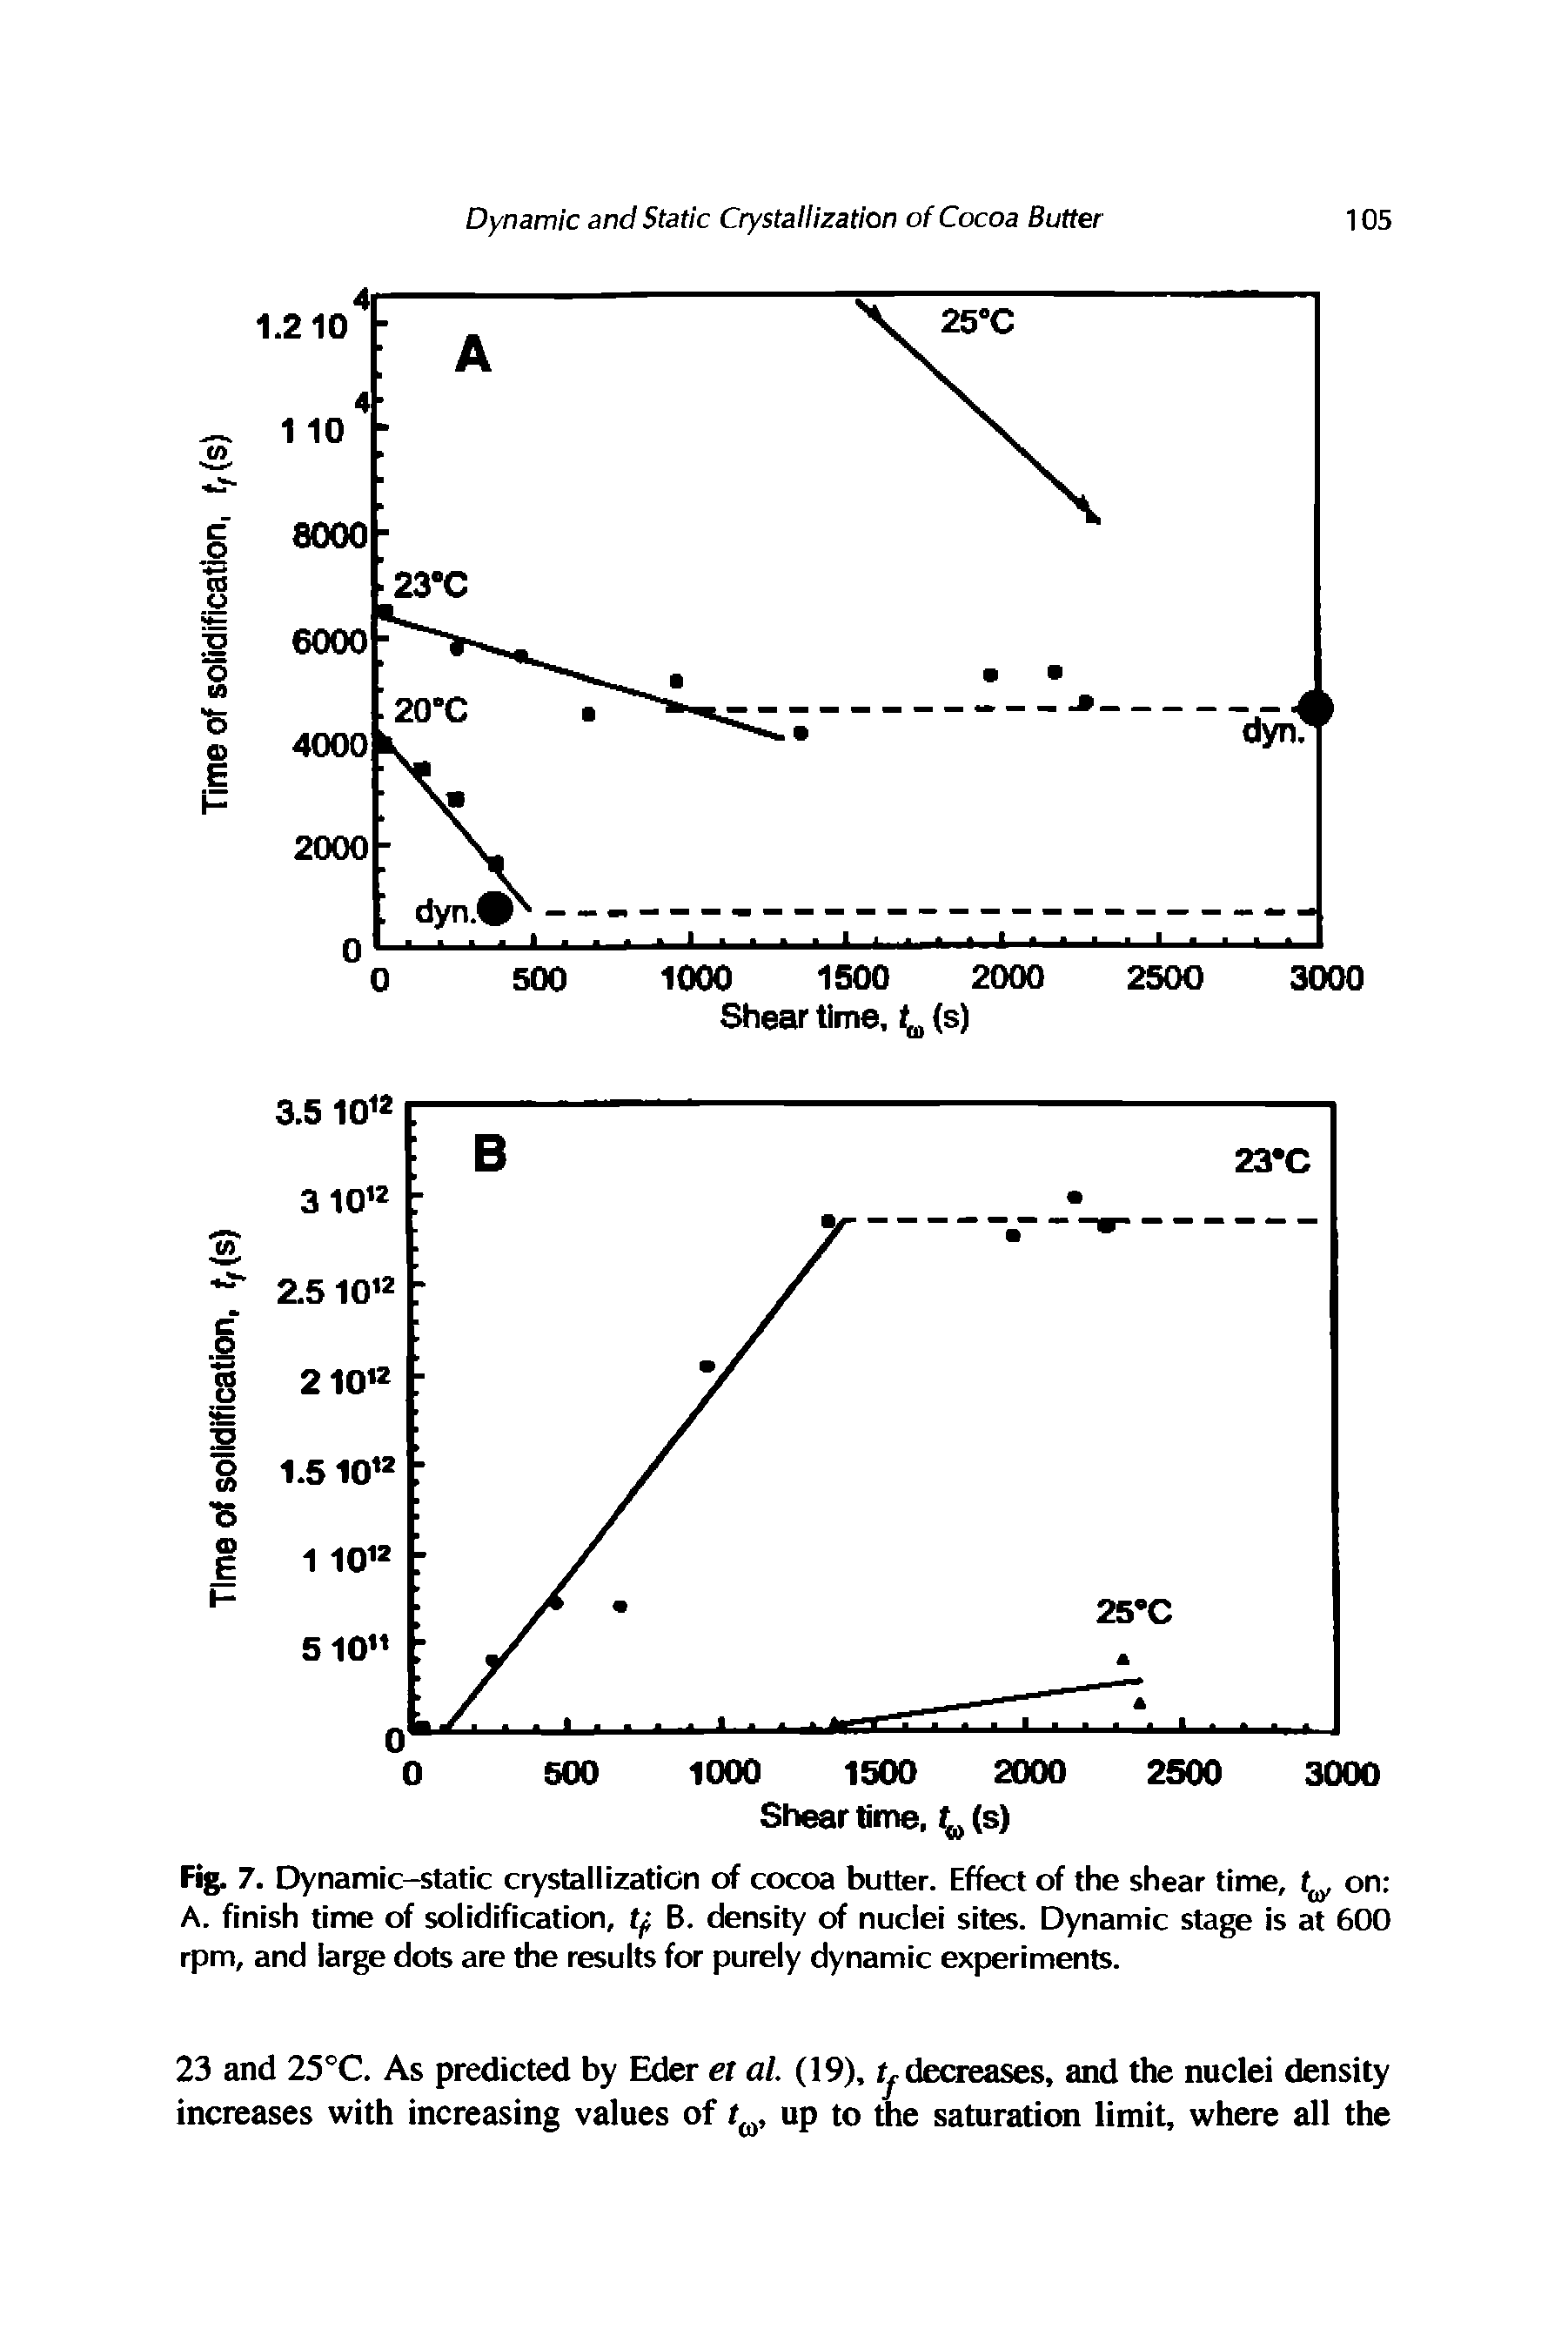 Fig. 7. Dynamic-static crystallization of cocoa butter. Effect of the shear time, on A. finish time of solidification, B. density of nuclei sites. Dynamic stage is at 600 rpm, and large dots are the results for purely dynamic experiments.